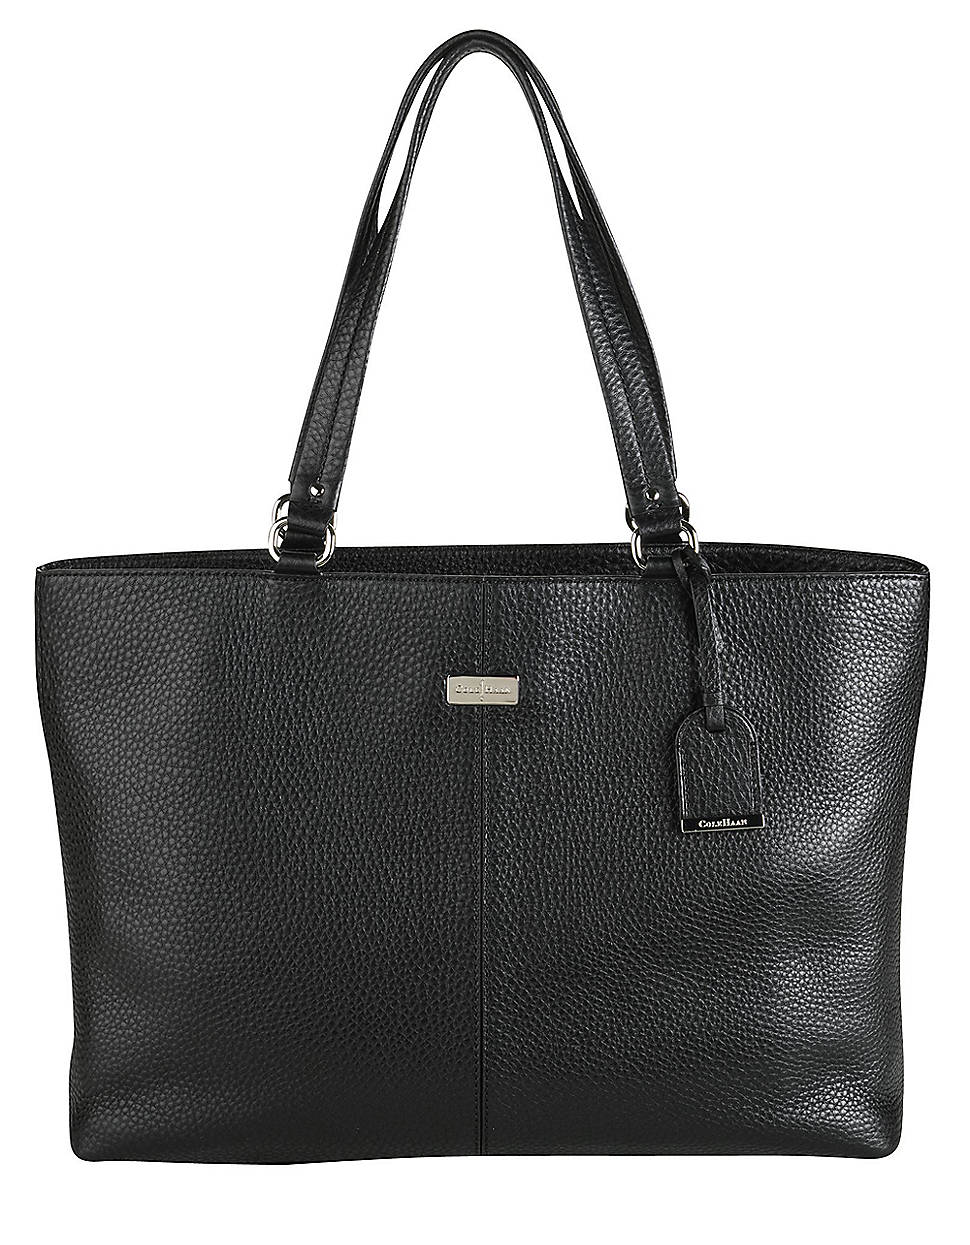 Cole Haan Village Leather Tech Tote Bag in Black | Lyst